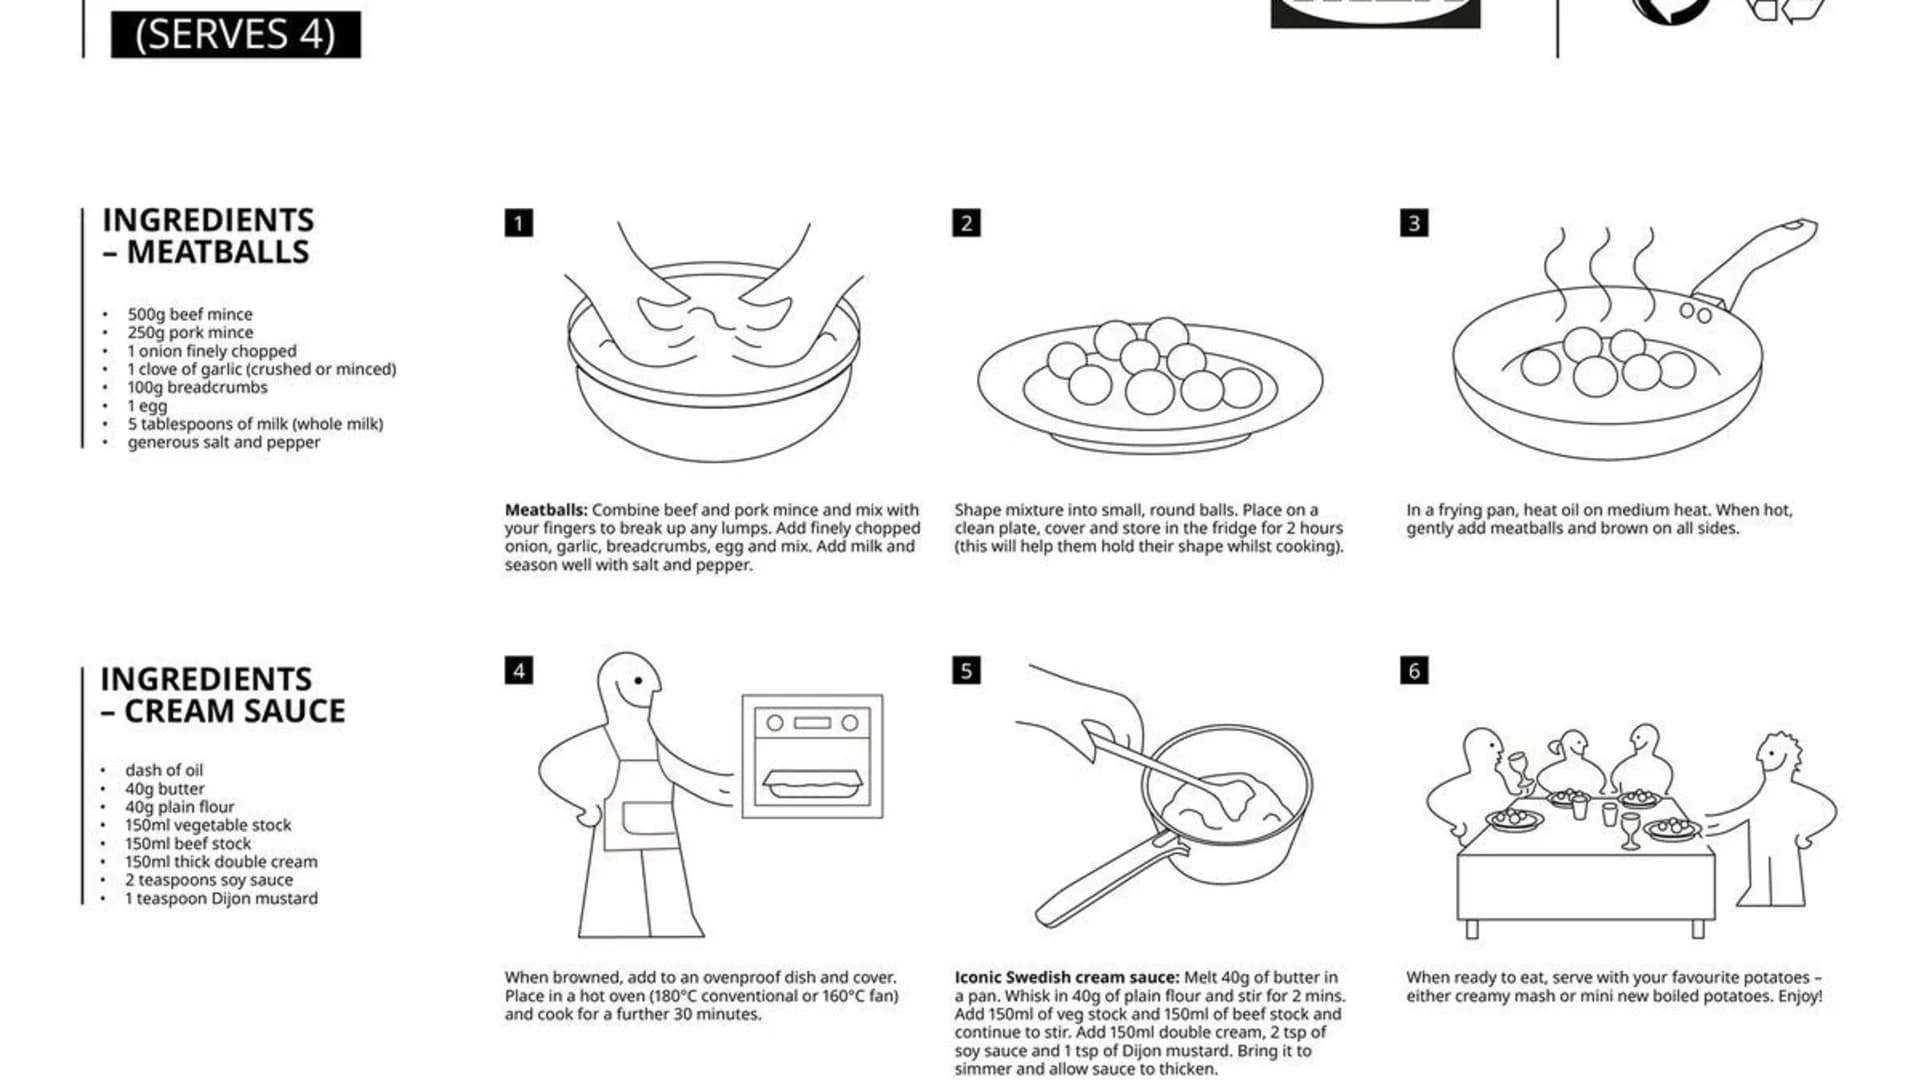 Ikea offers famous Swedish meatballs recipe to shoppers stuck at home